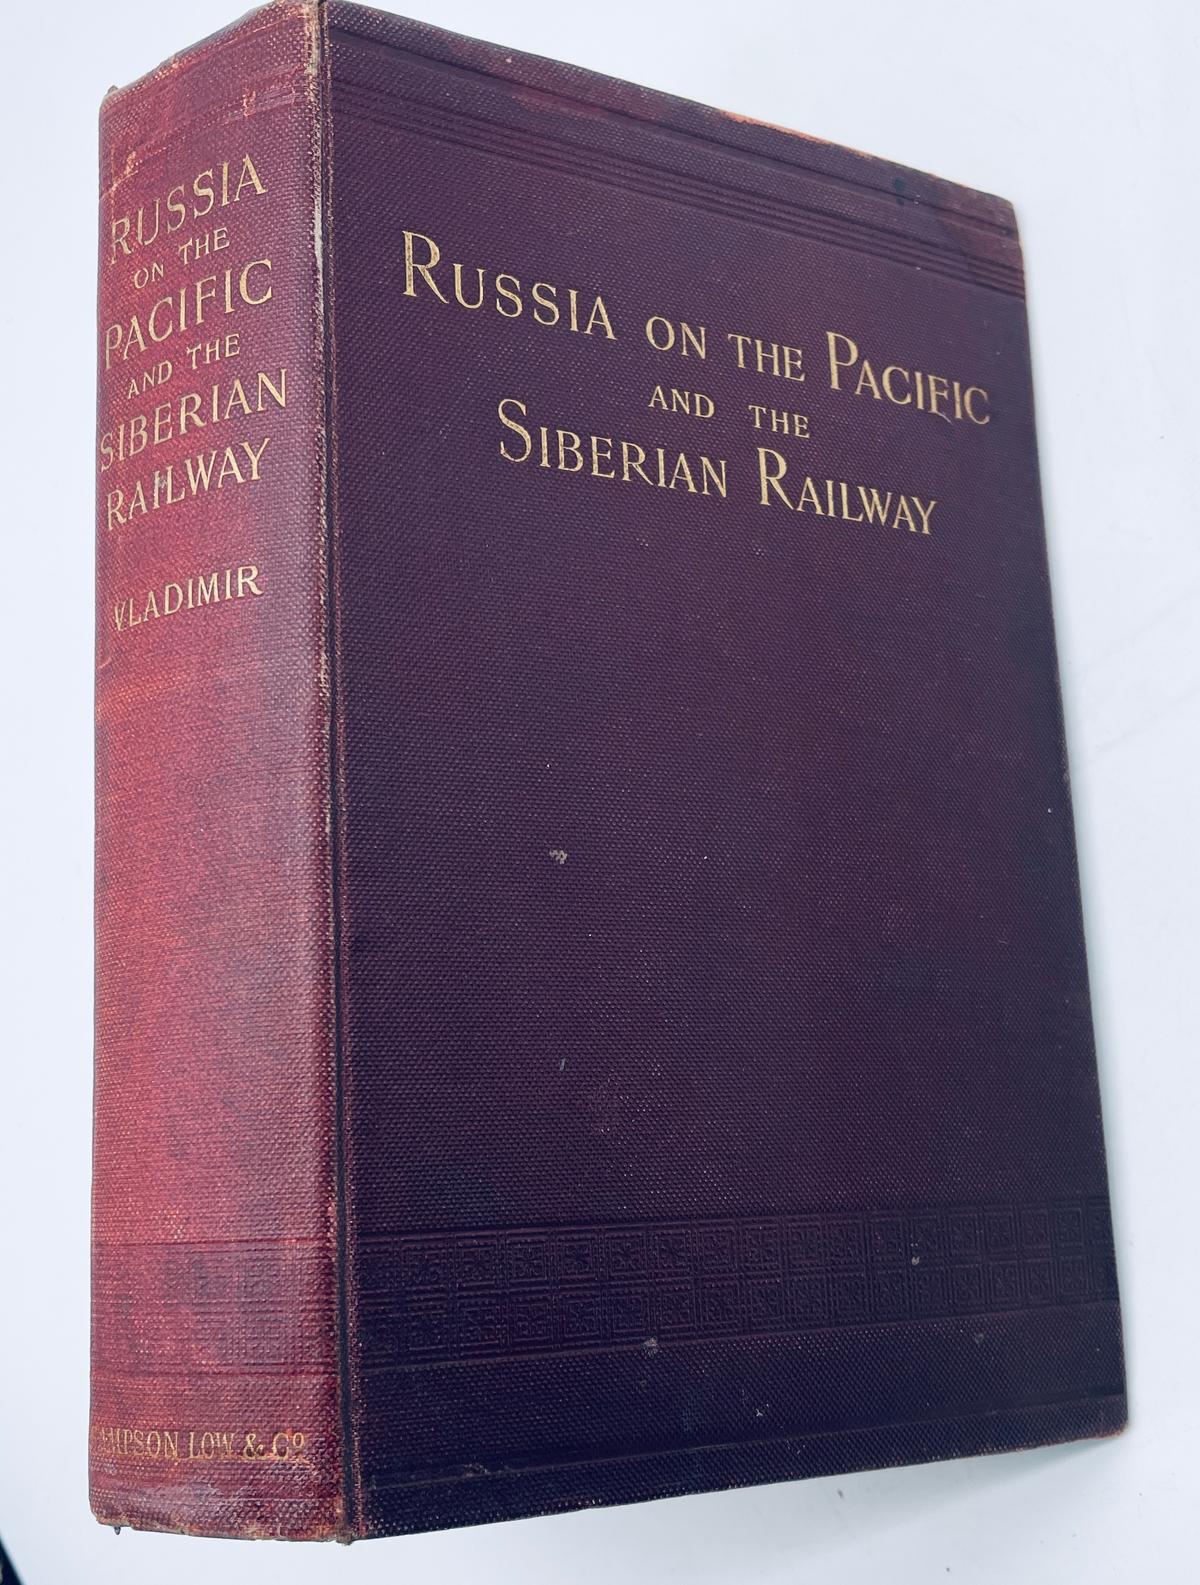 RARE Russia on the Pacific and the Siberian Railway (1899)